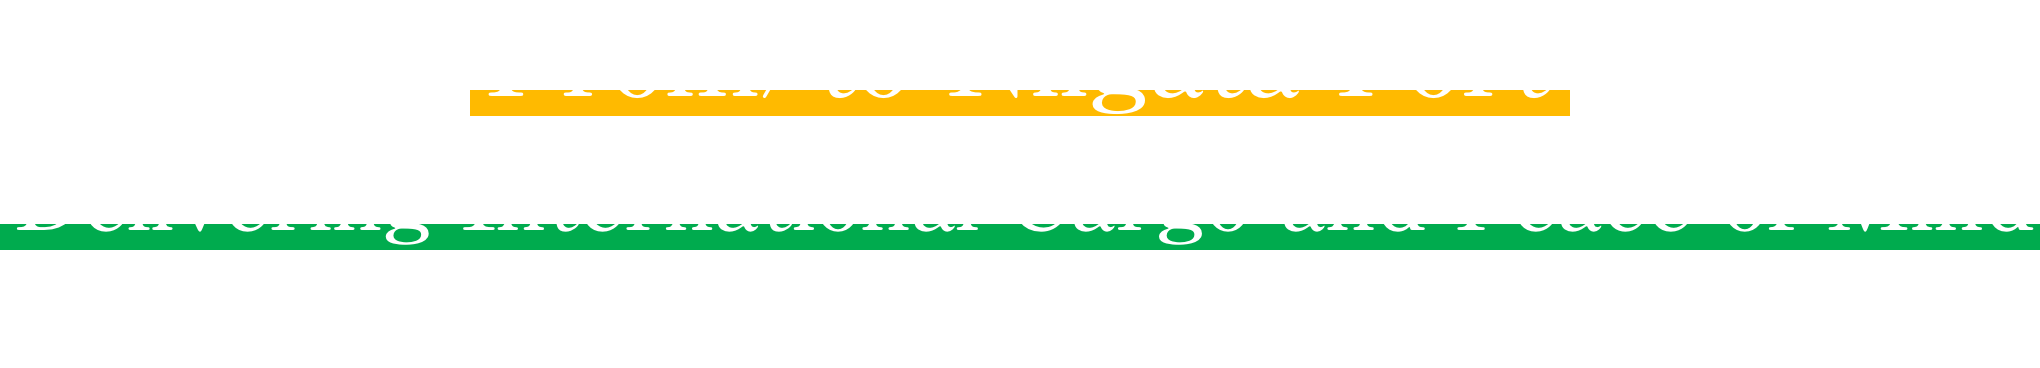 From/to Niigata Port Delivering International Cargo and Peace of Mind Leave it to us to import and export